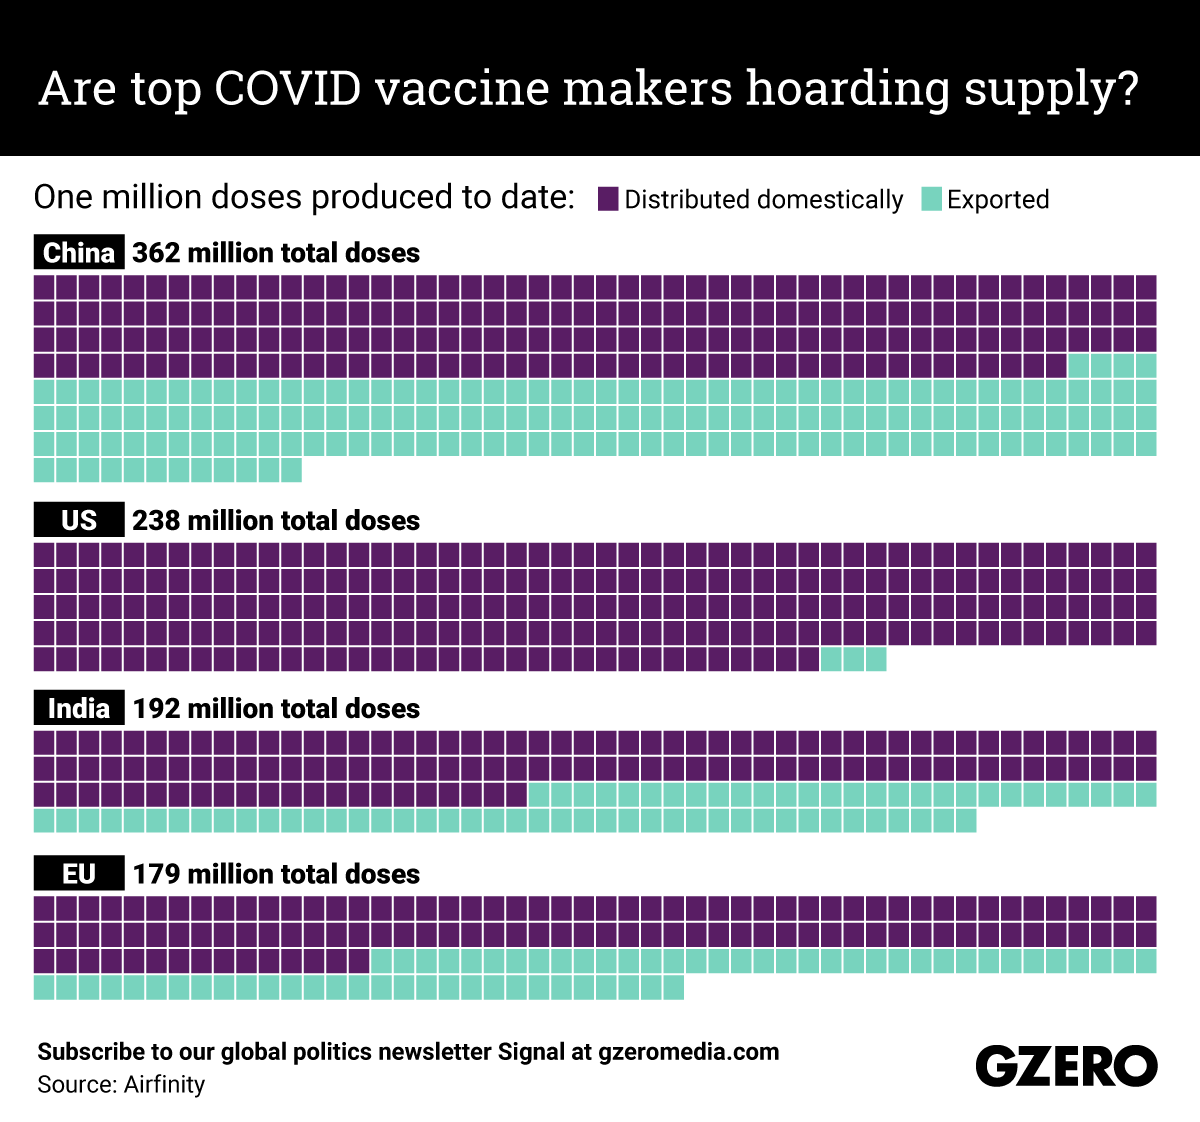 The Graphic Truth: Are top COVID vaccine makers hoarding supply?